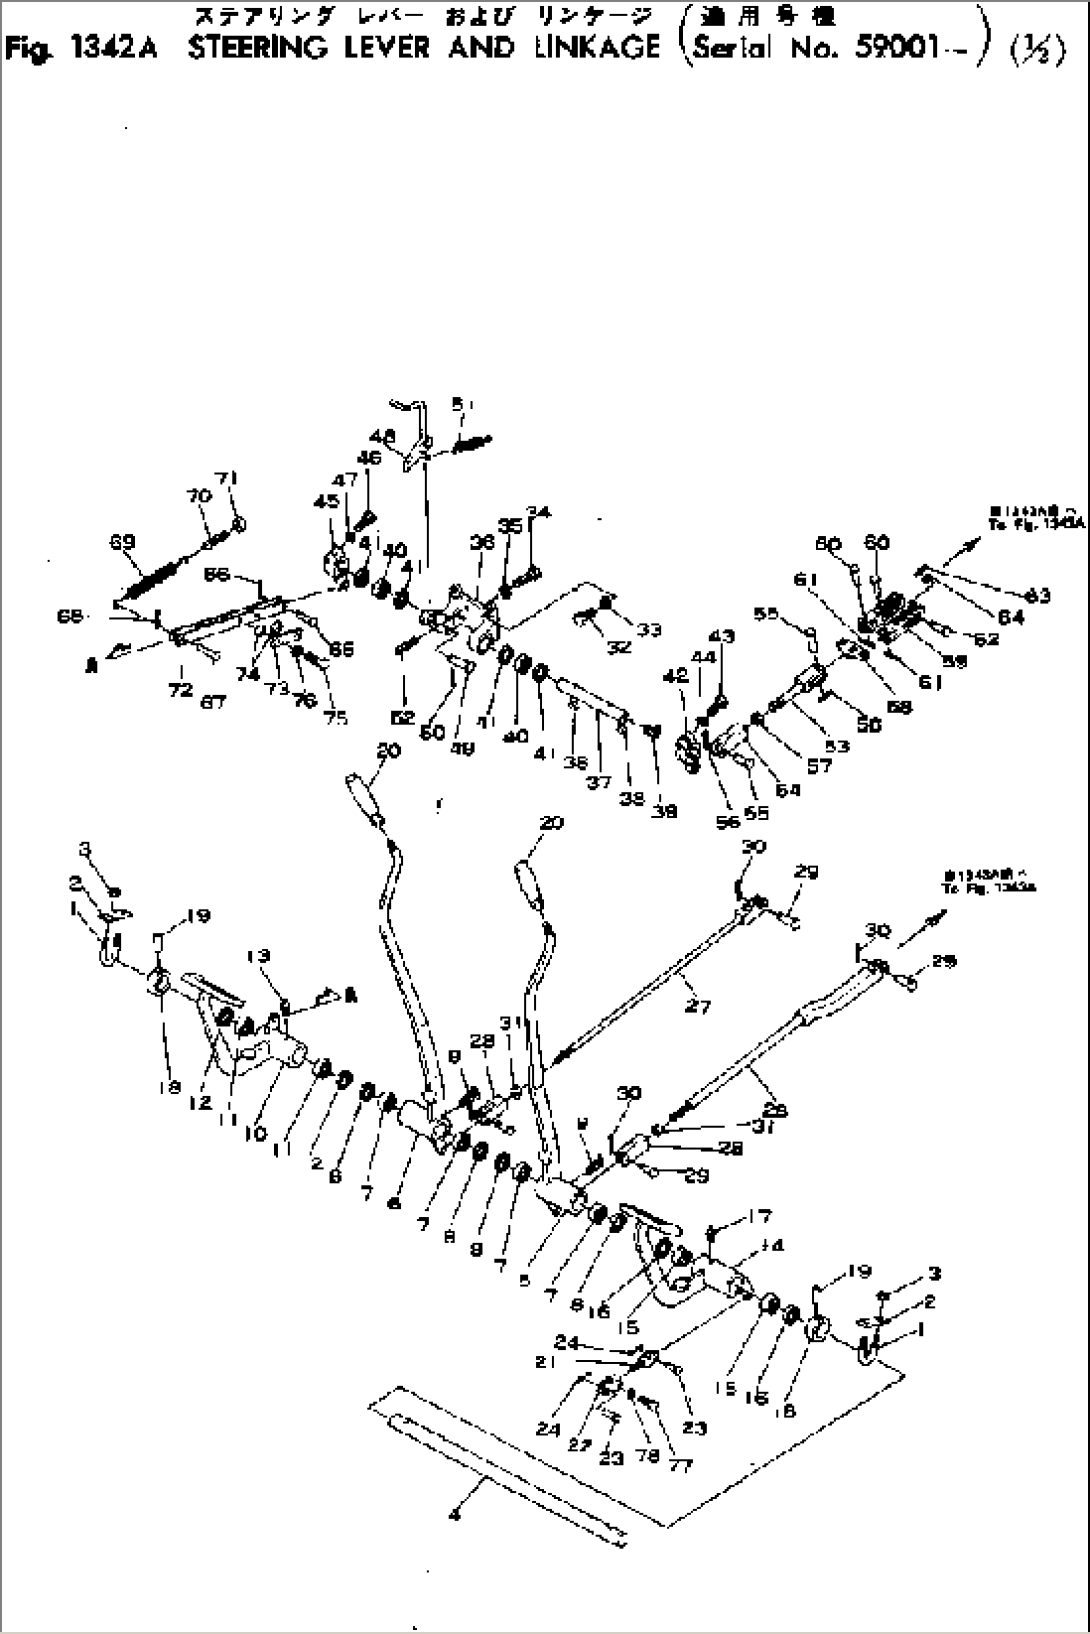 STEERING LEVER AND LINKAGE (1/2)(#59001-)